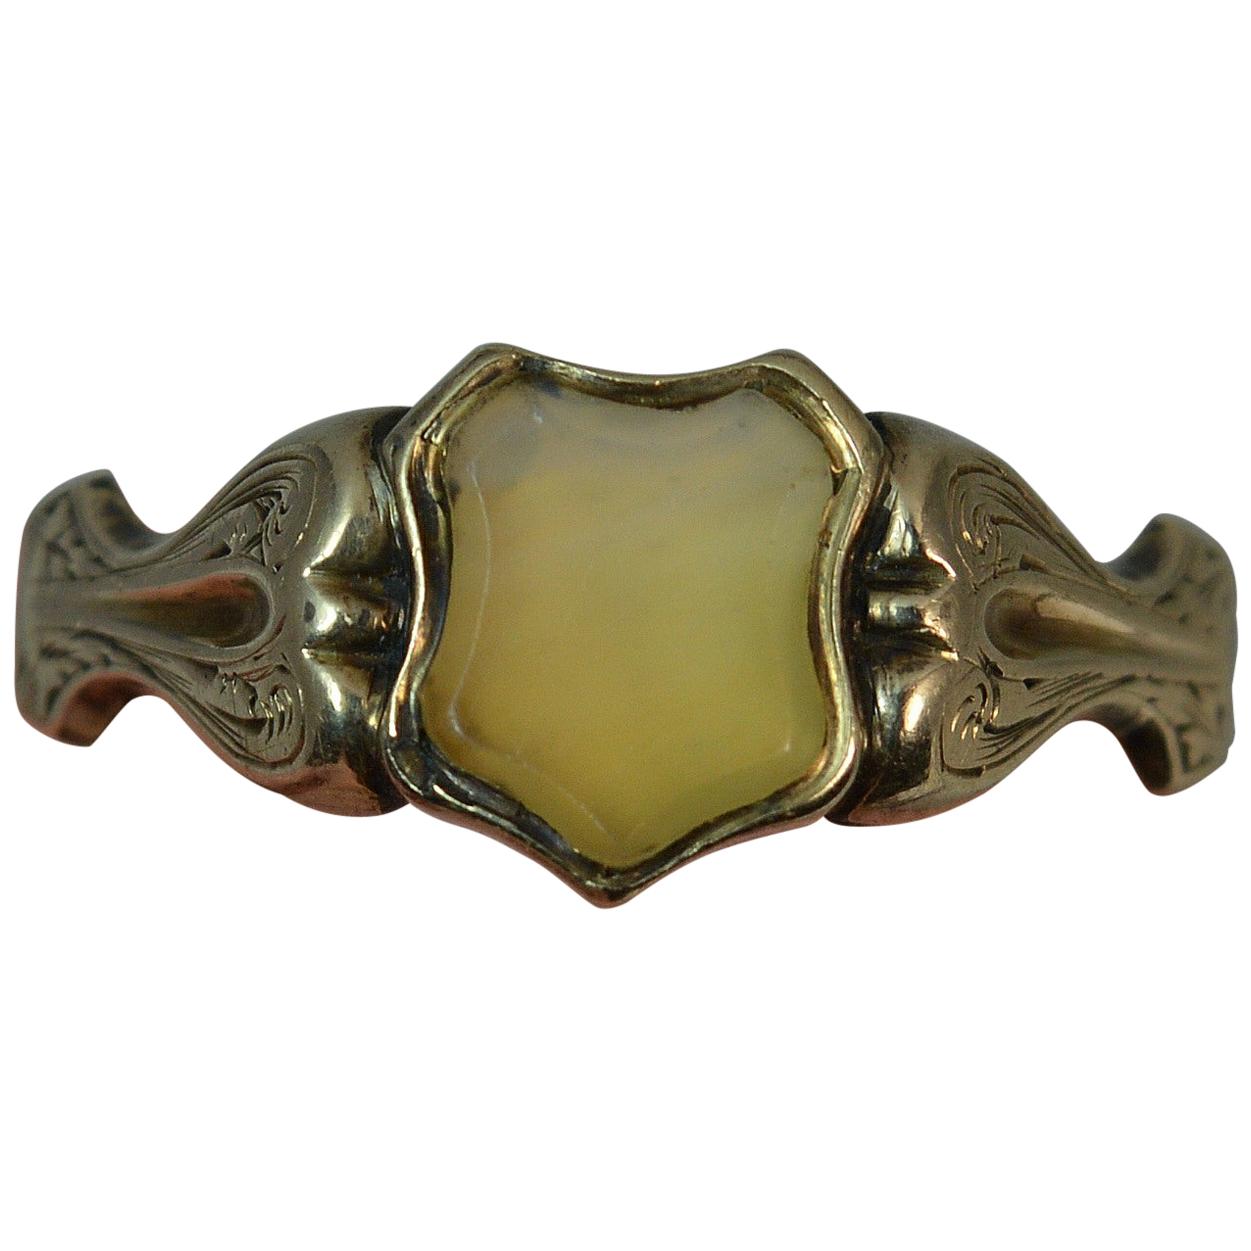 Victorian 14 Carat Gold Shield Shaped Agate Signet Ring